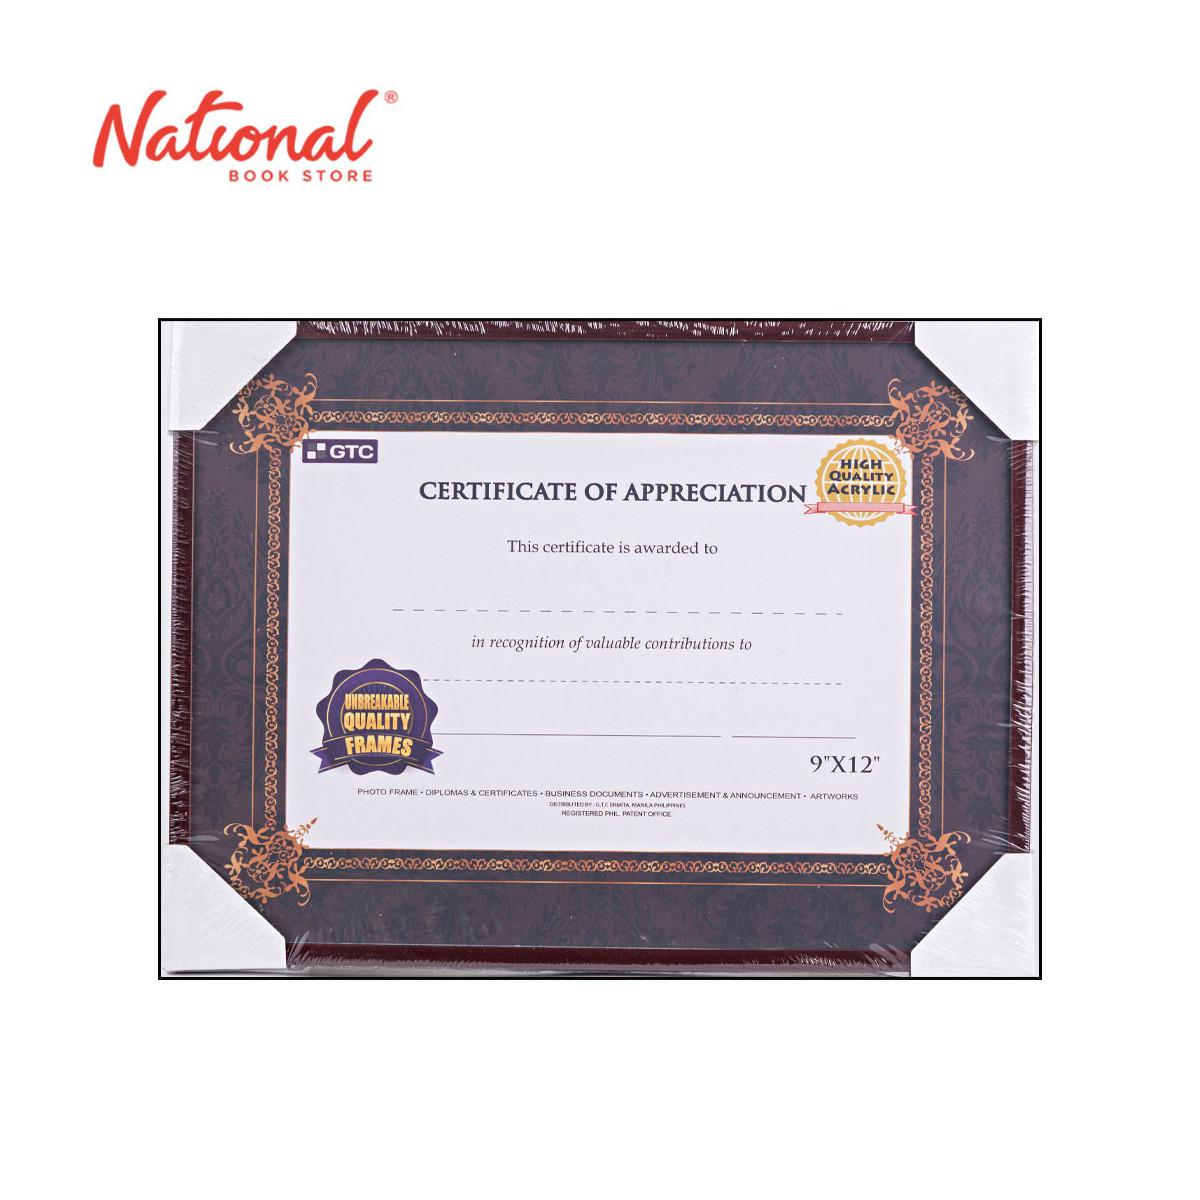 GTC Certificate Frame Tl912 9x12 inches PVC - Gifts - Frames